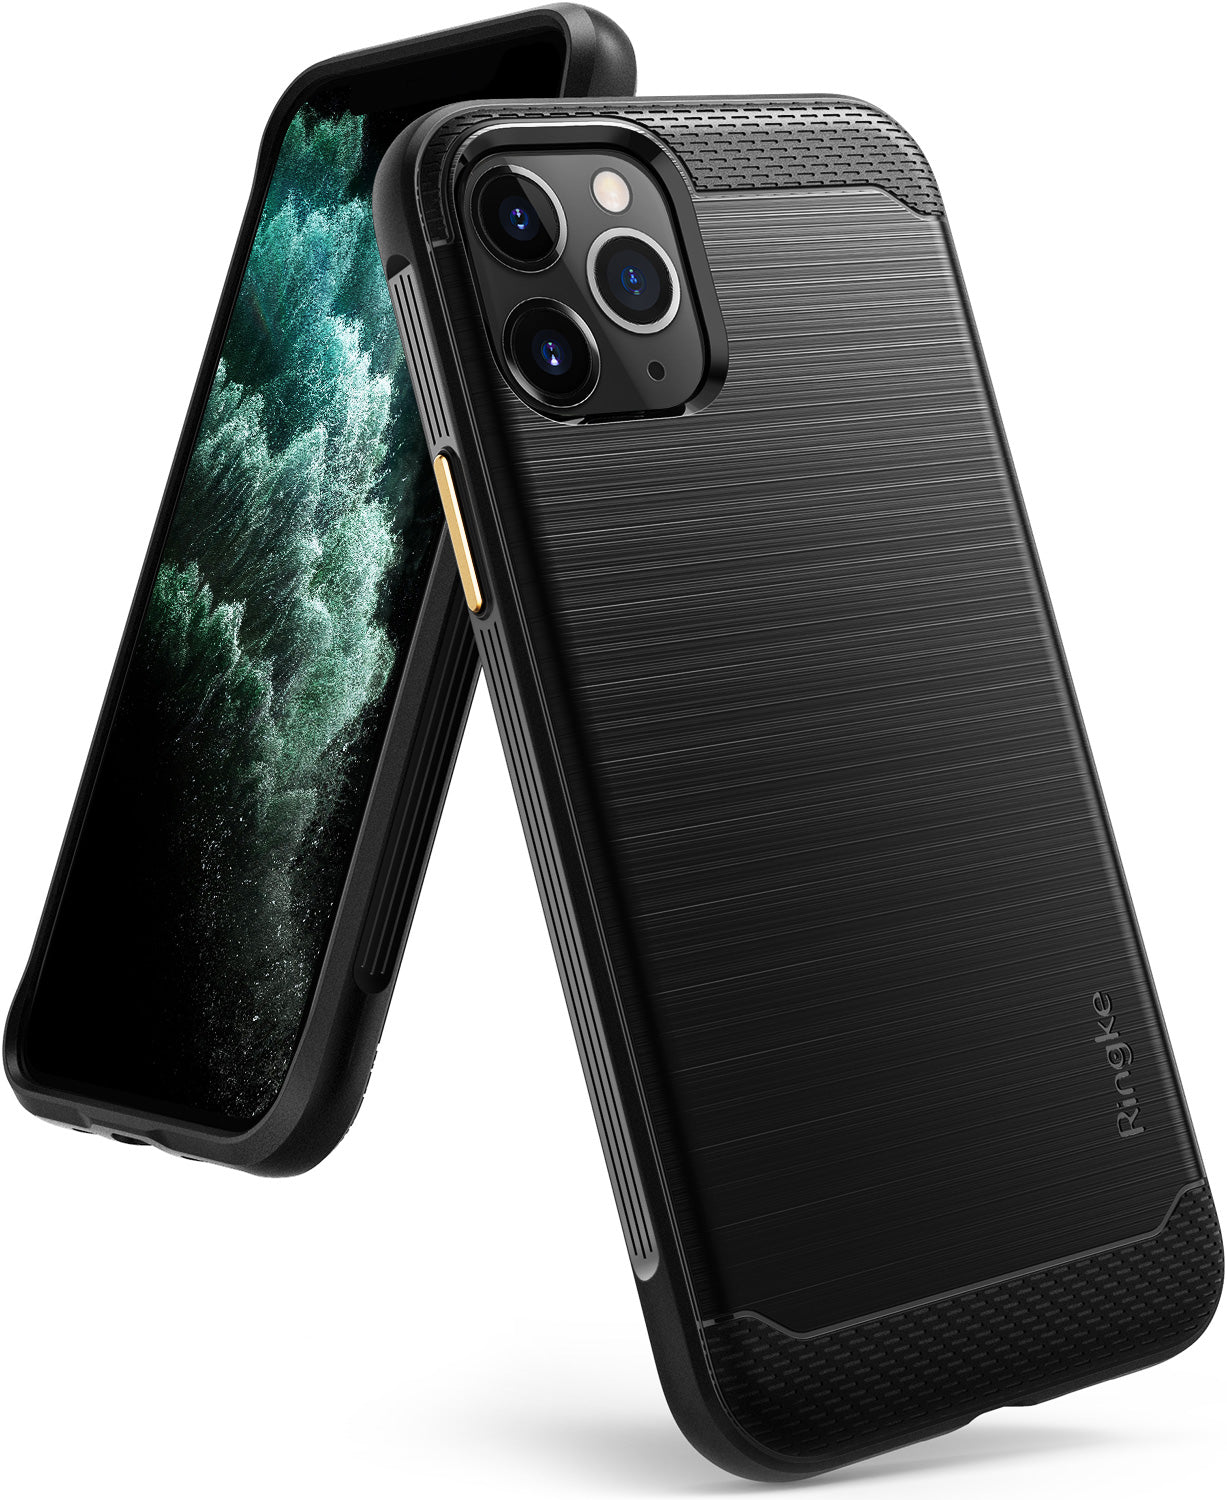 Ringke Onyx Case compatible with iPhone 11 Pro Max Black